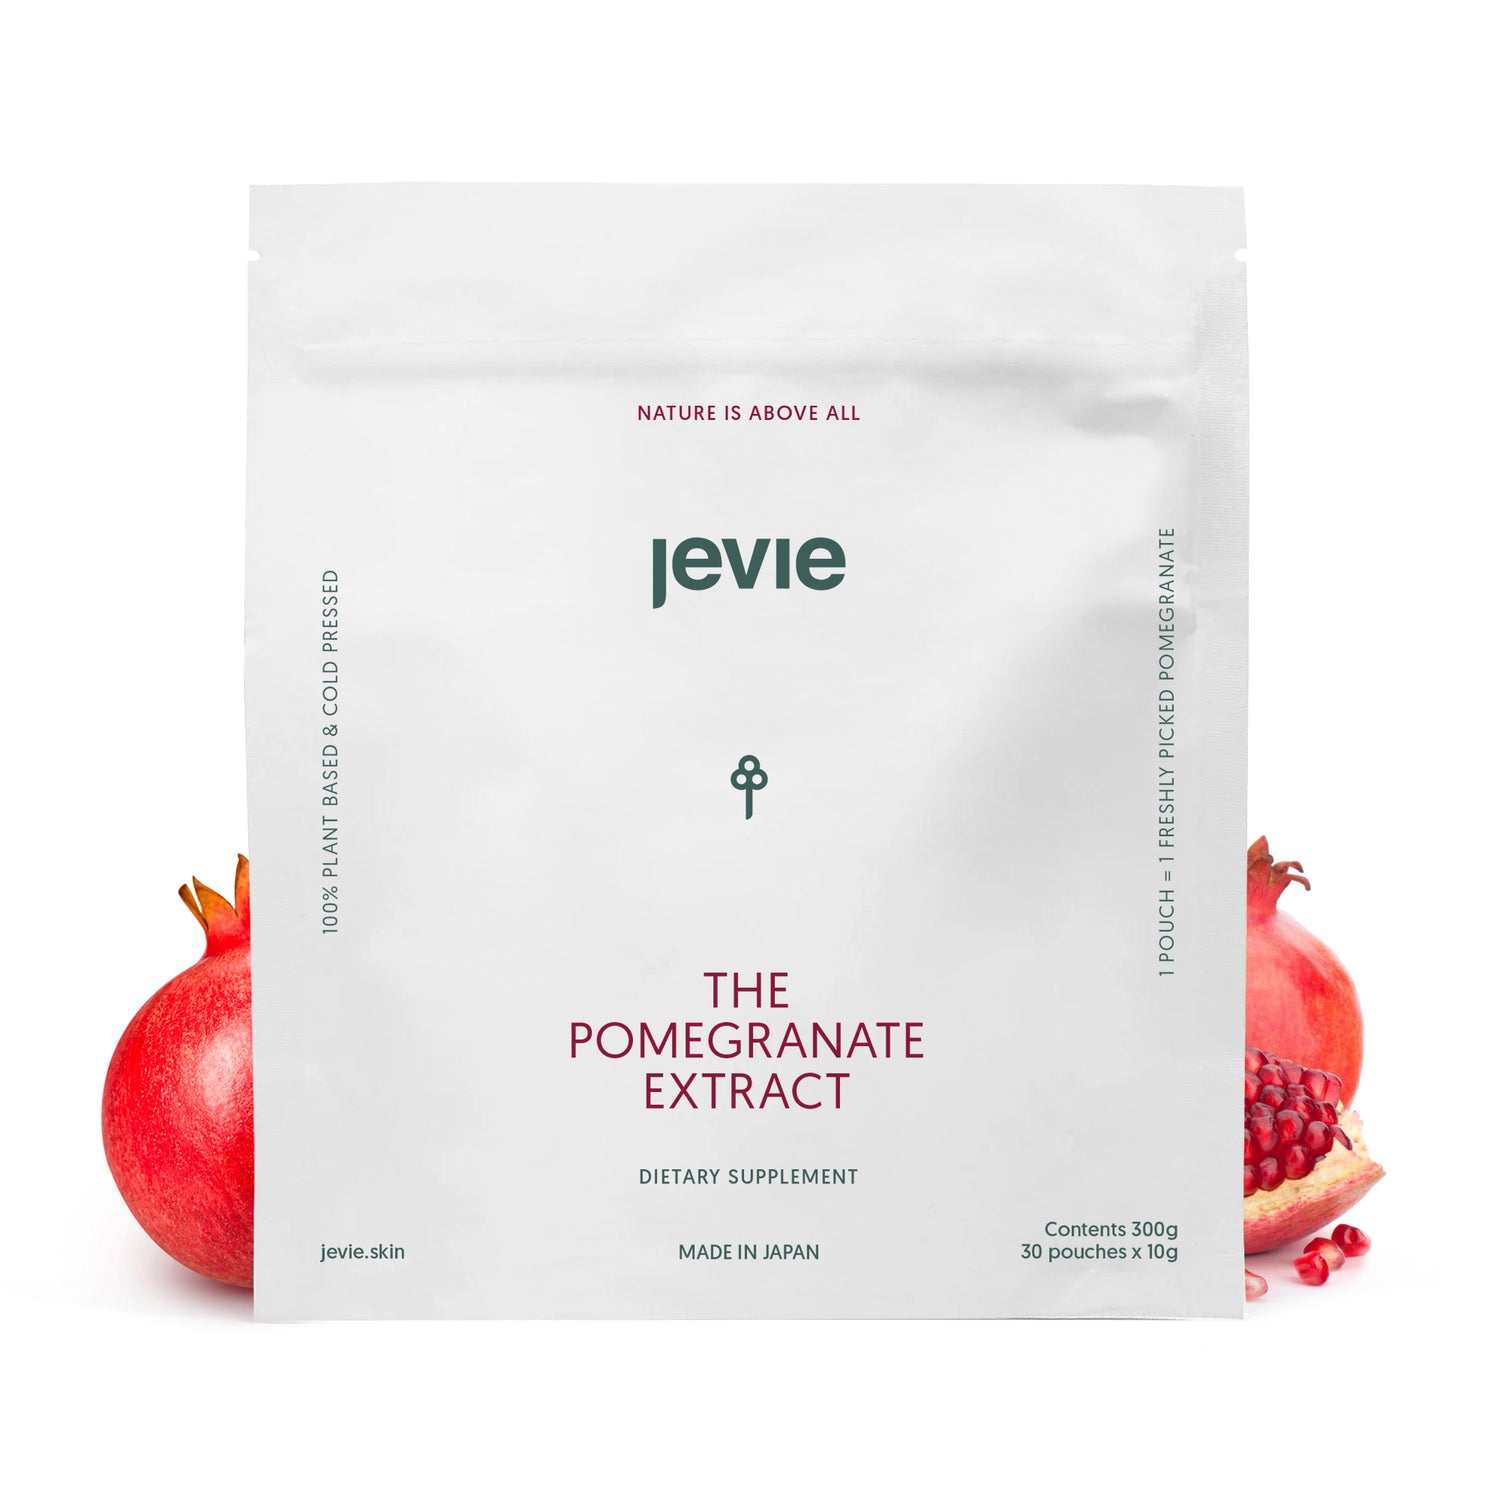 THE POMEGRANATE EXTRACT